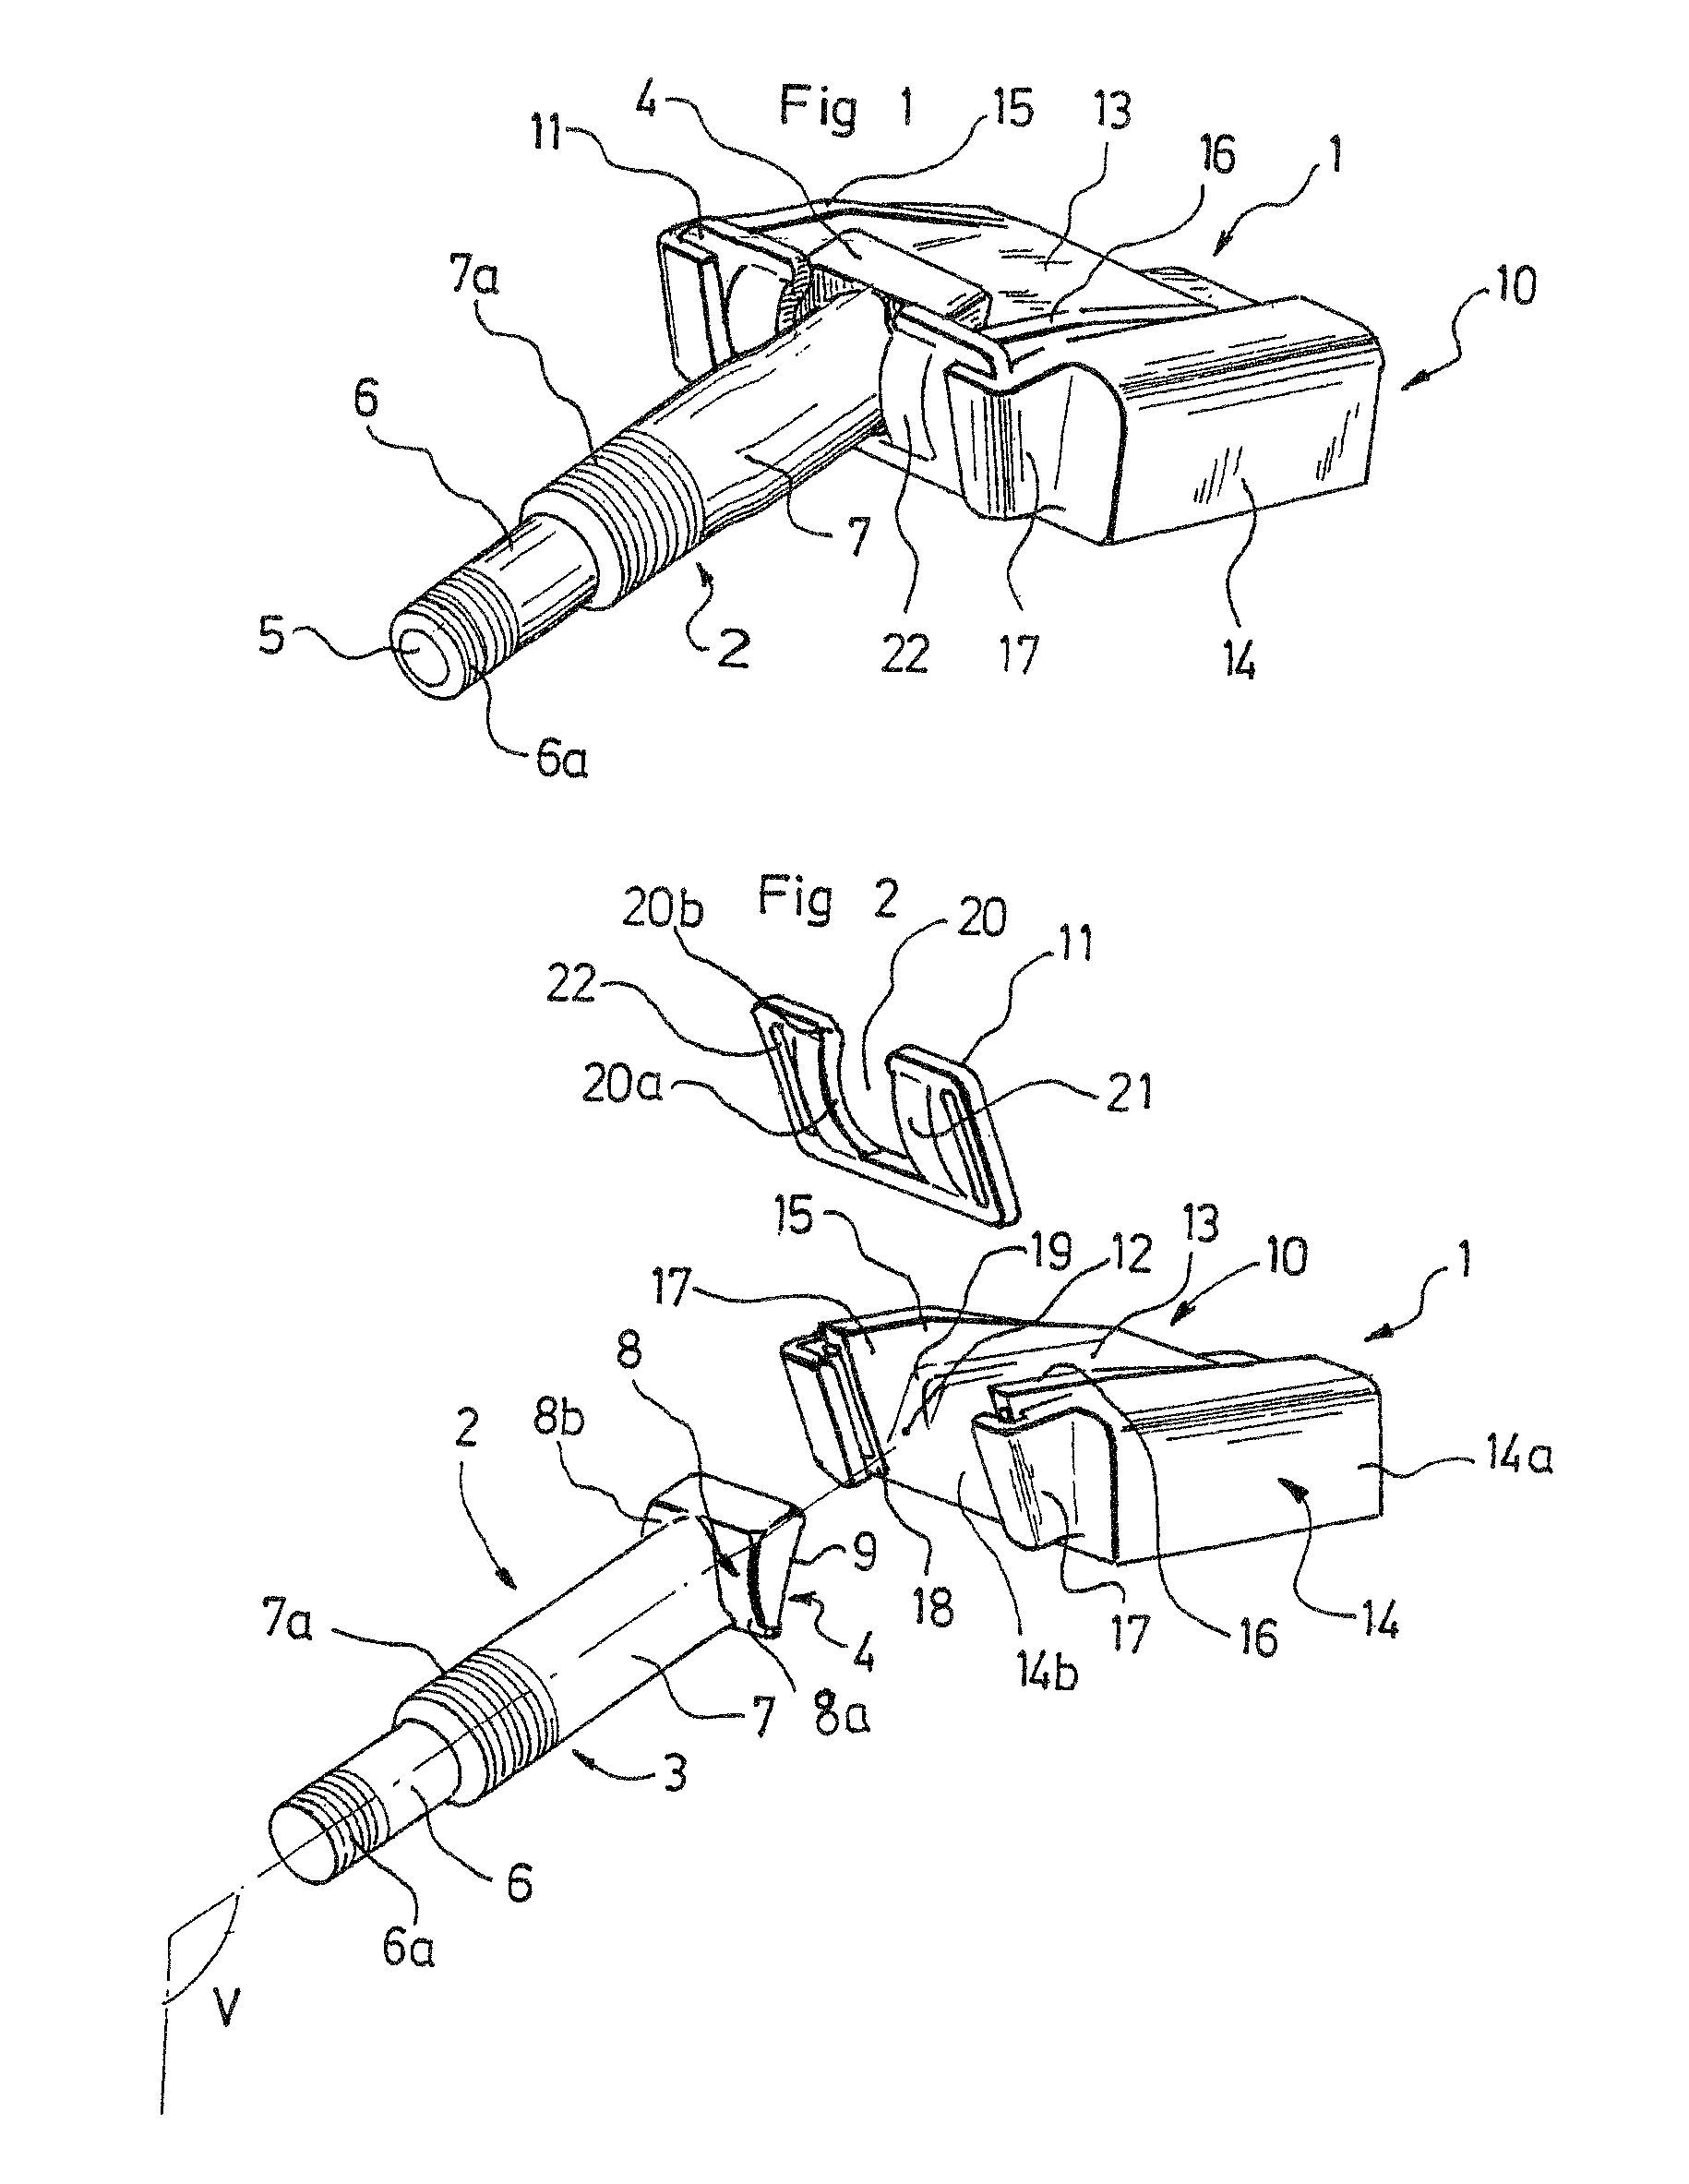 Electronic unit for measuring operating parameters of a vehicle wheel